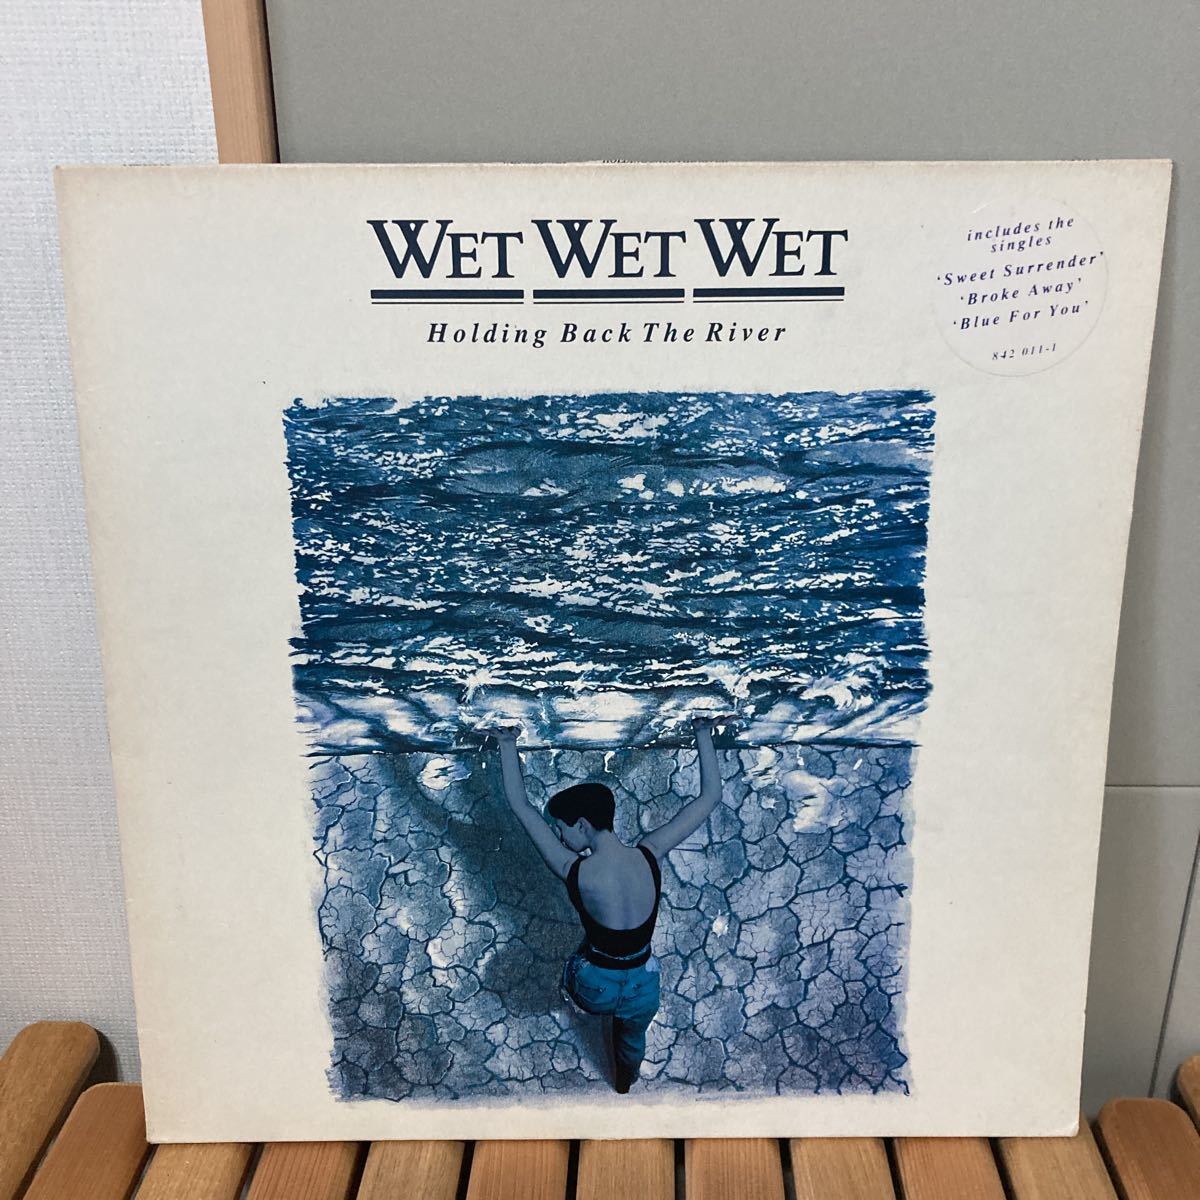 WET WET WET 、holding back the river、LP、 ネオアコ、インディロック、ギターポップ、indie rock、new wave_画像1